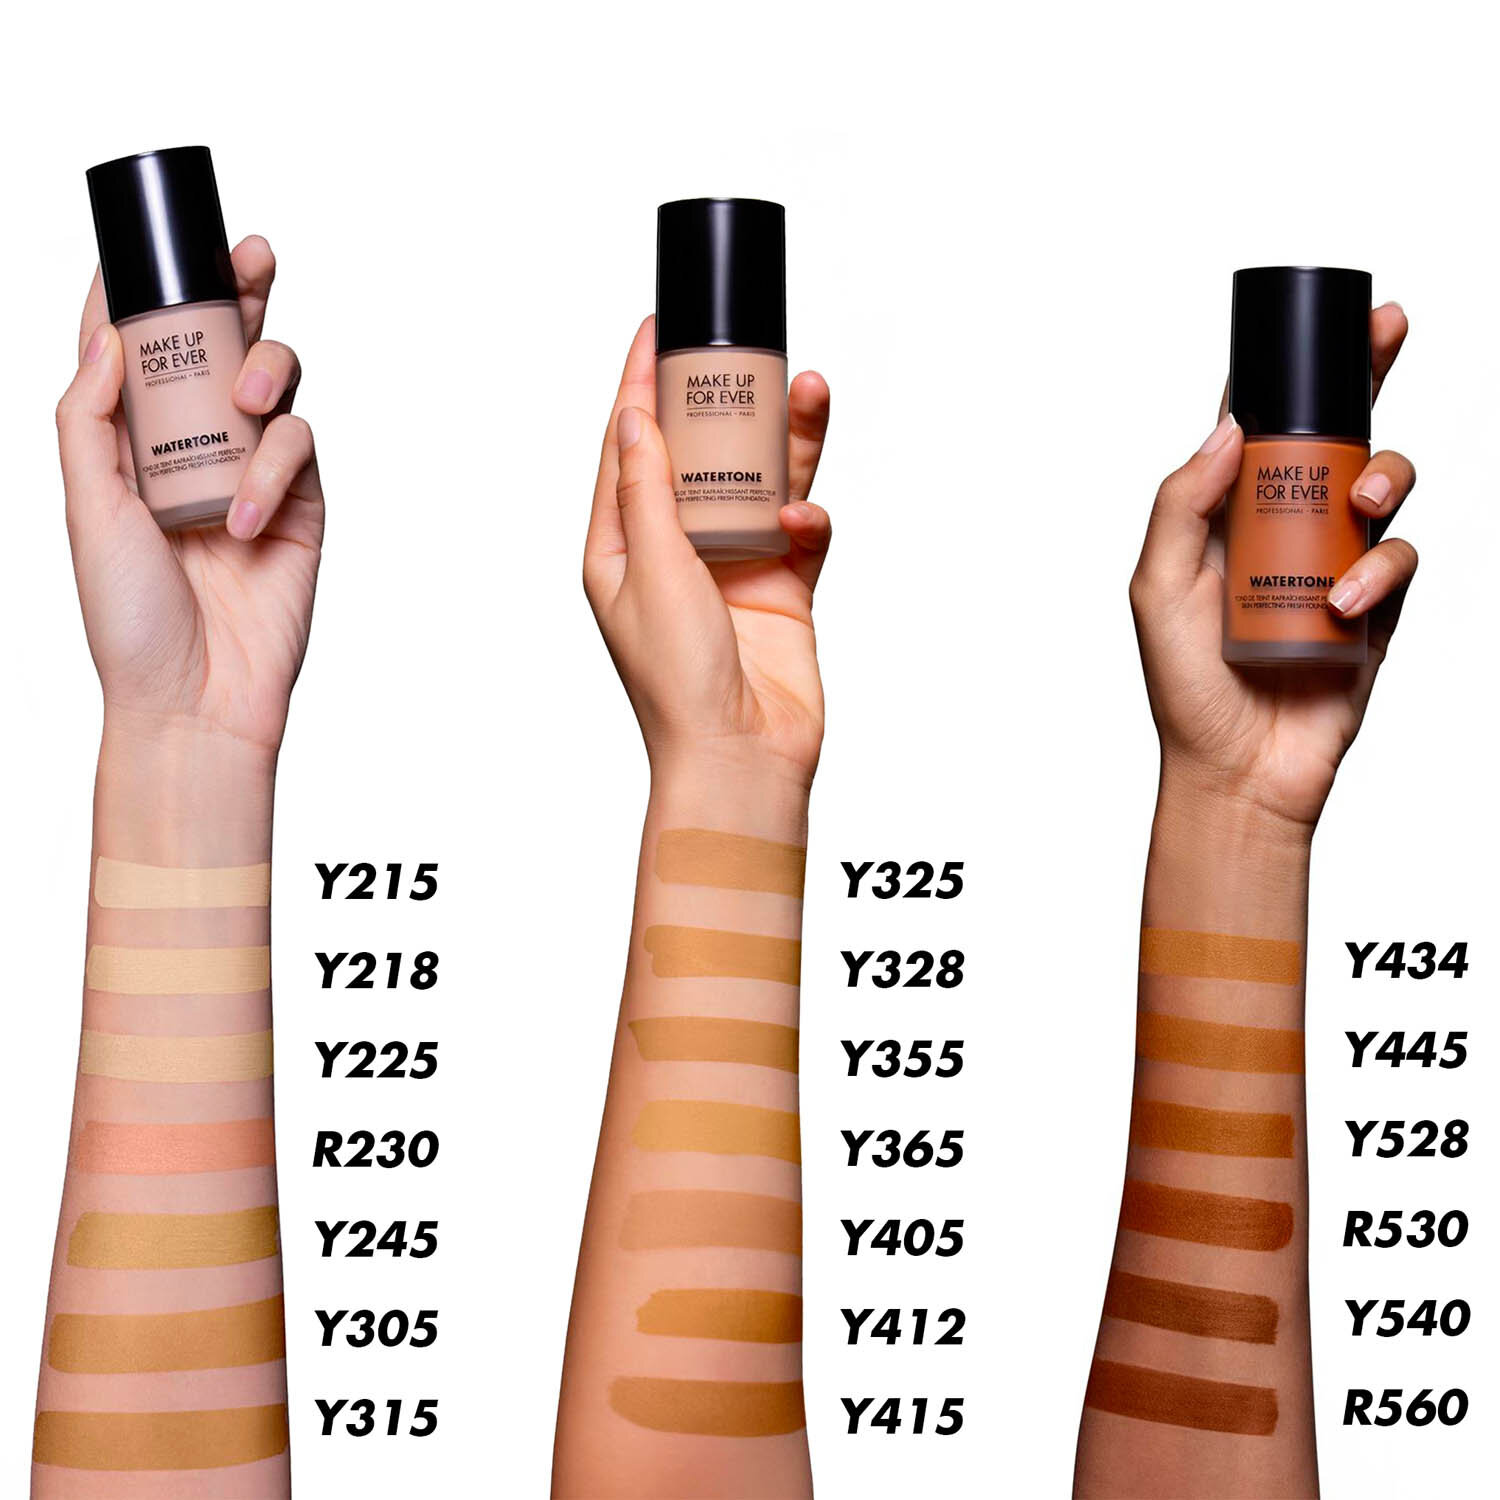 MAKE UP FOR EVER Watertone Skin-Perfecting Fresh Foundation Skin Tint Swatches Shades Colors Nuancen welche Farbe